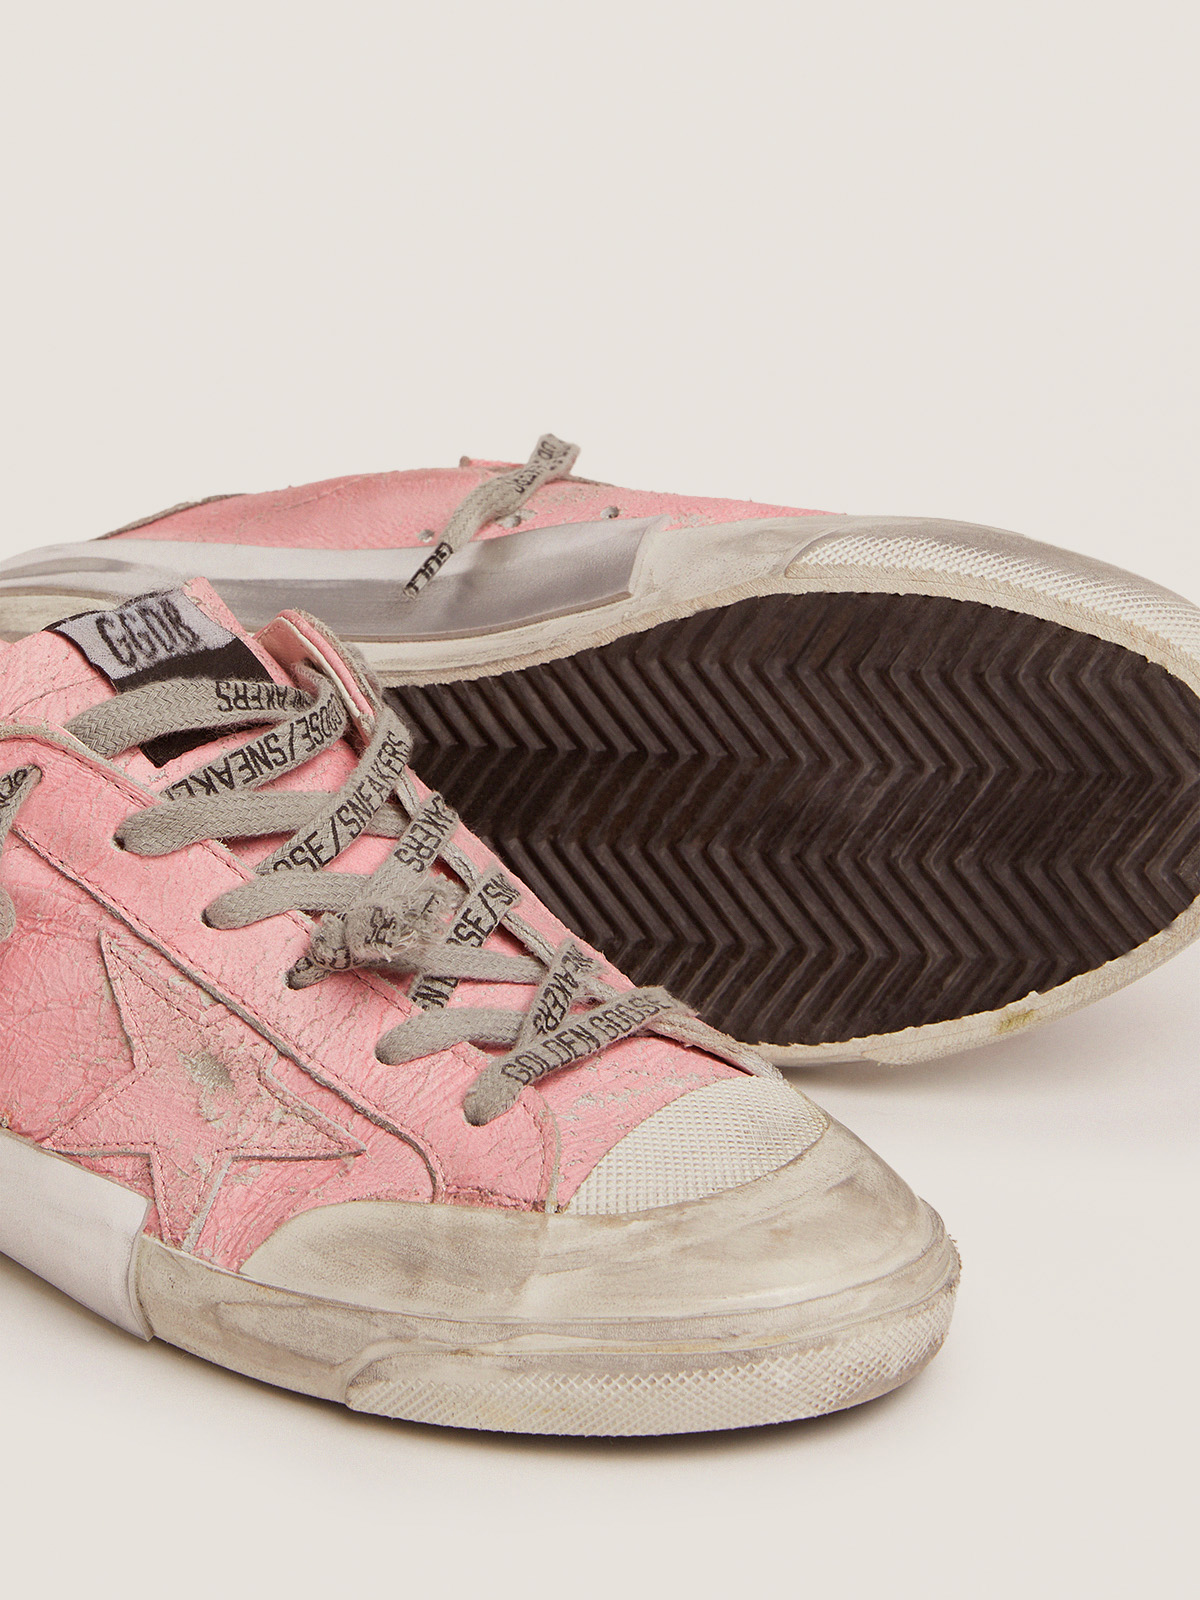 Super-Star sneakers in pink crackled leather and multi-foxing | Golden Goose